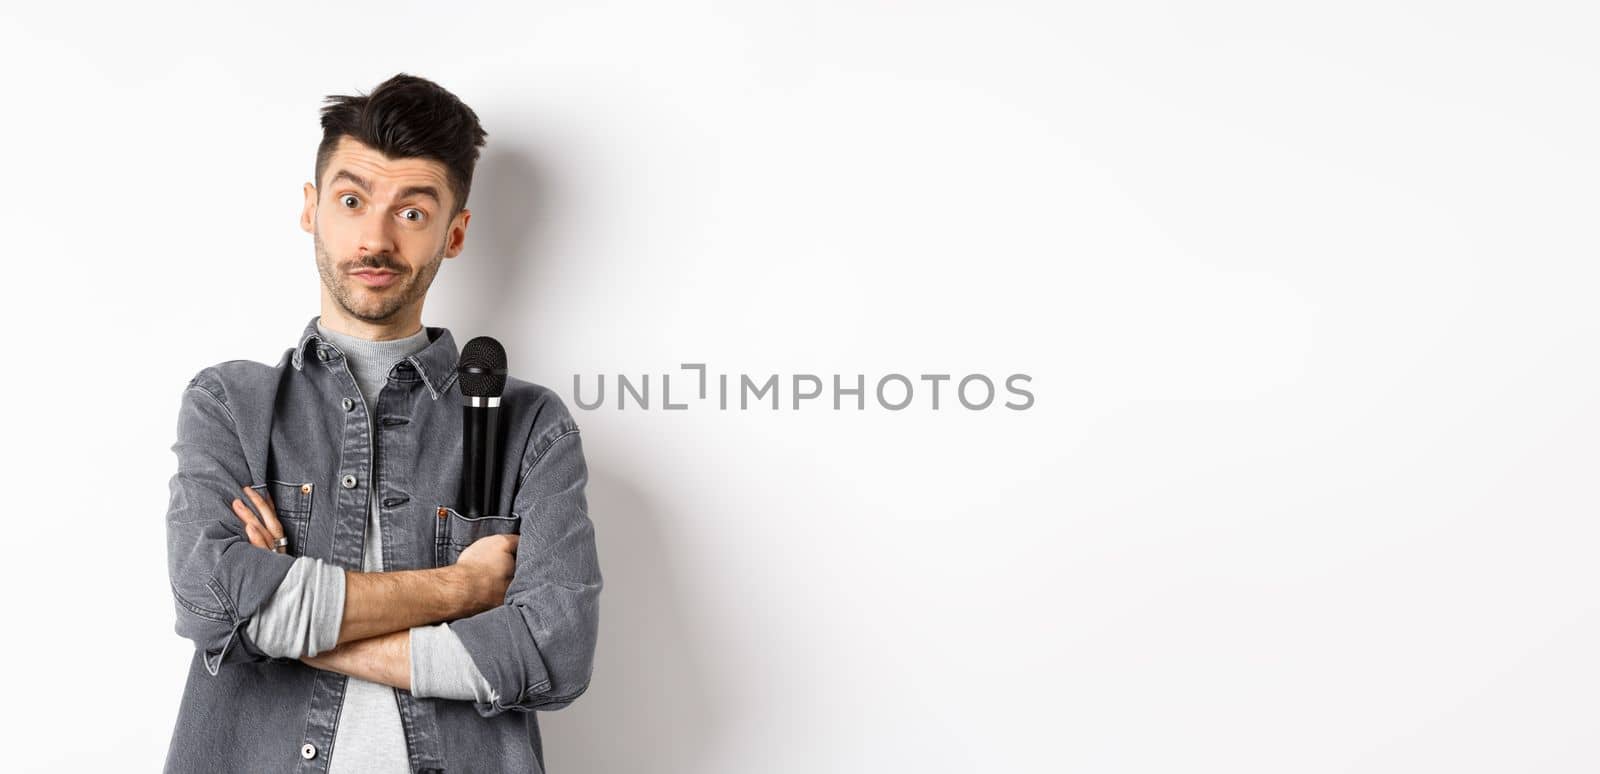 Image of funny male entertainer or singer, holding microphone in pocket of jacket and look at camera with arms crossed, standing against white background.